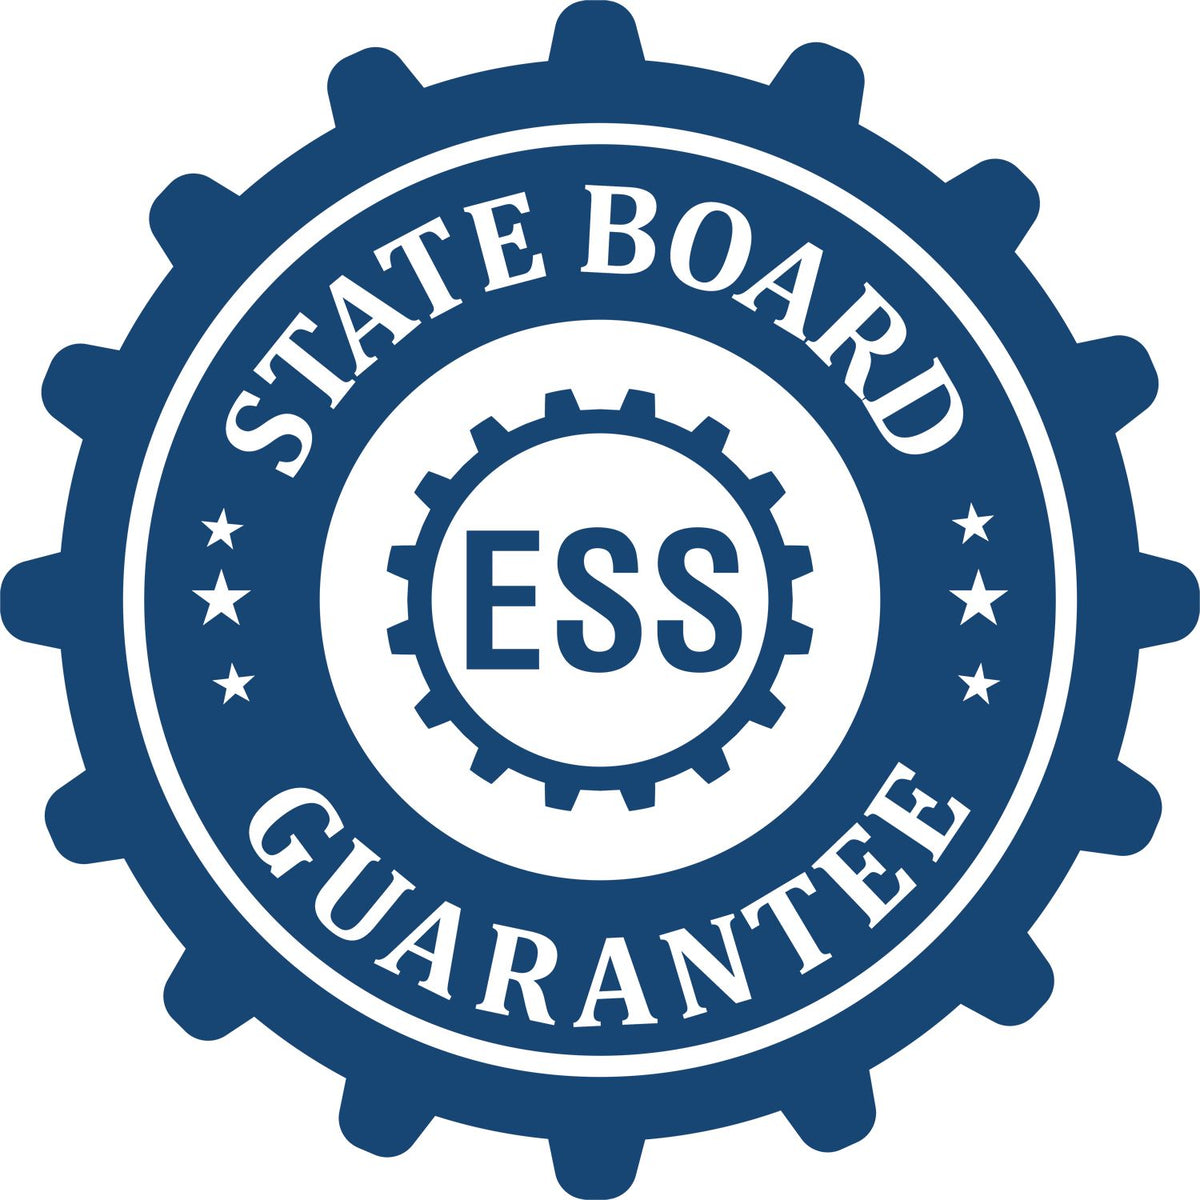 An emblem in a gear shape illustrating a state board guarantee for the Digital South Carolina Landscape Architect Stamp product.